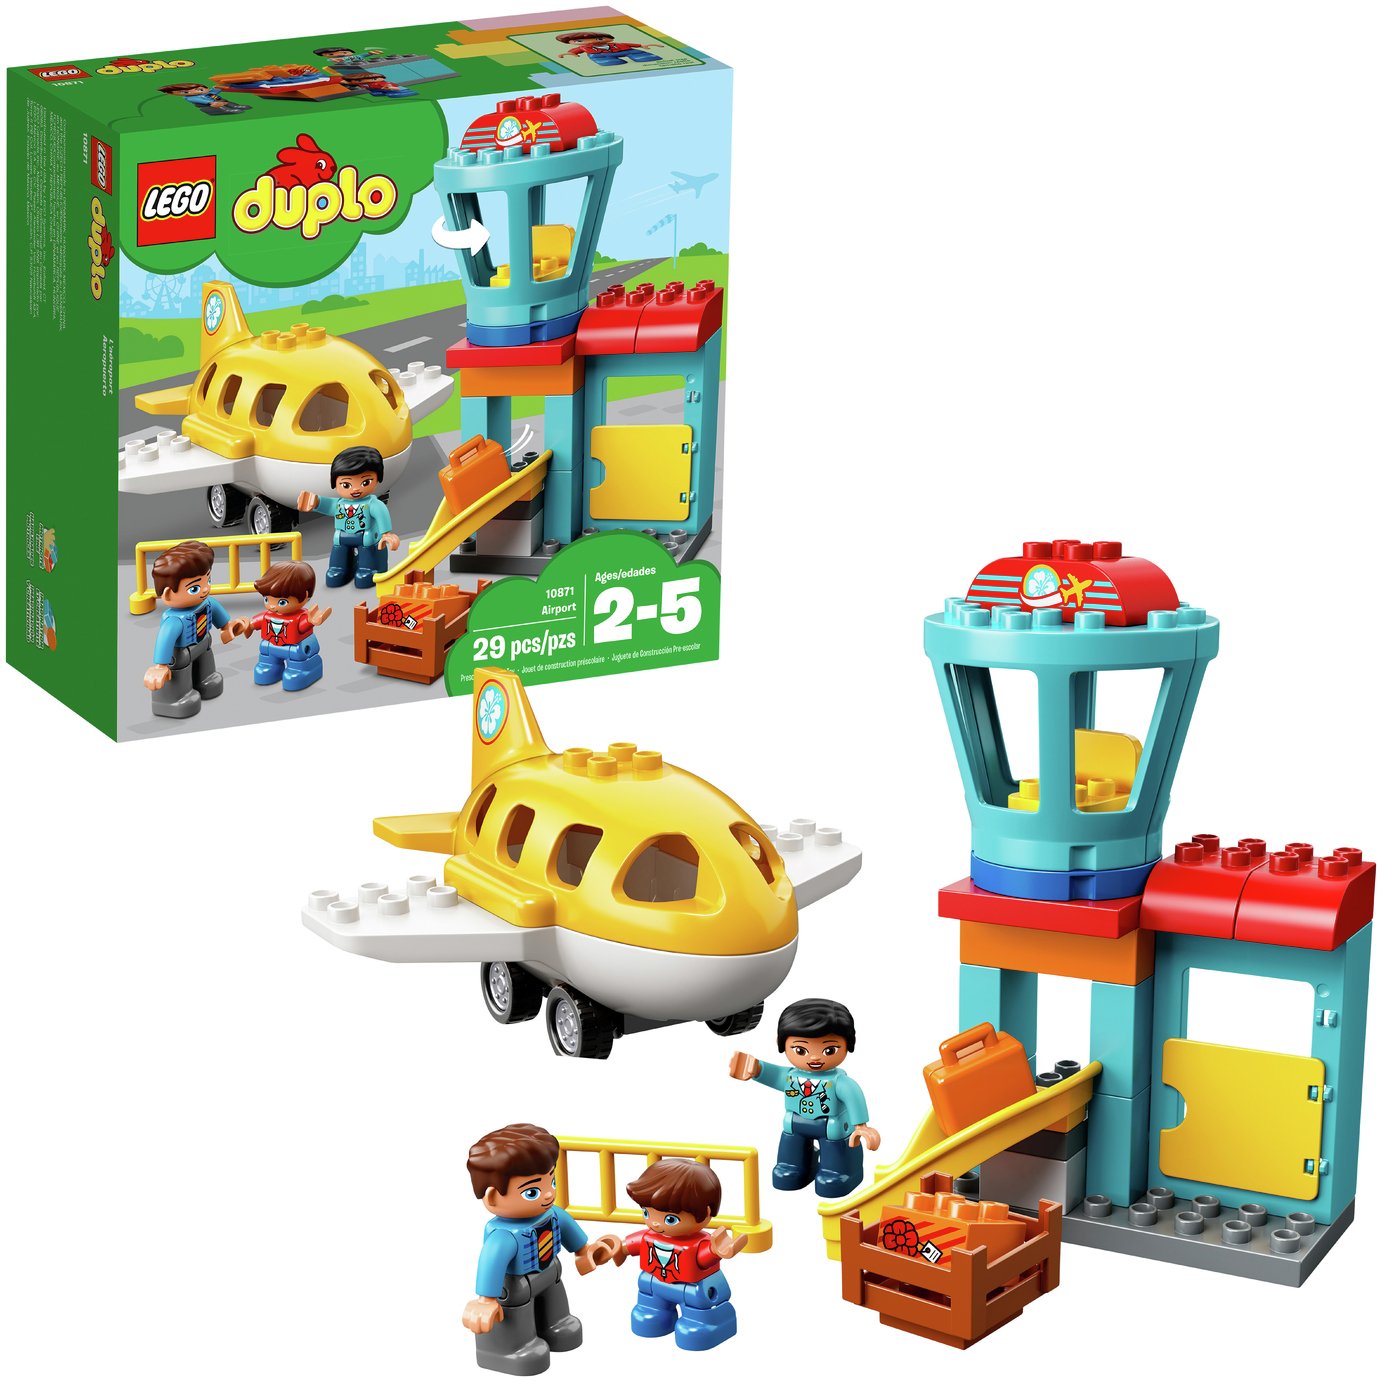 LEGO DUPLO My Town Airport and Airplane Toy 10871 (8054292) Argos